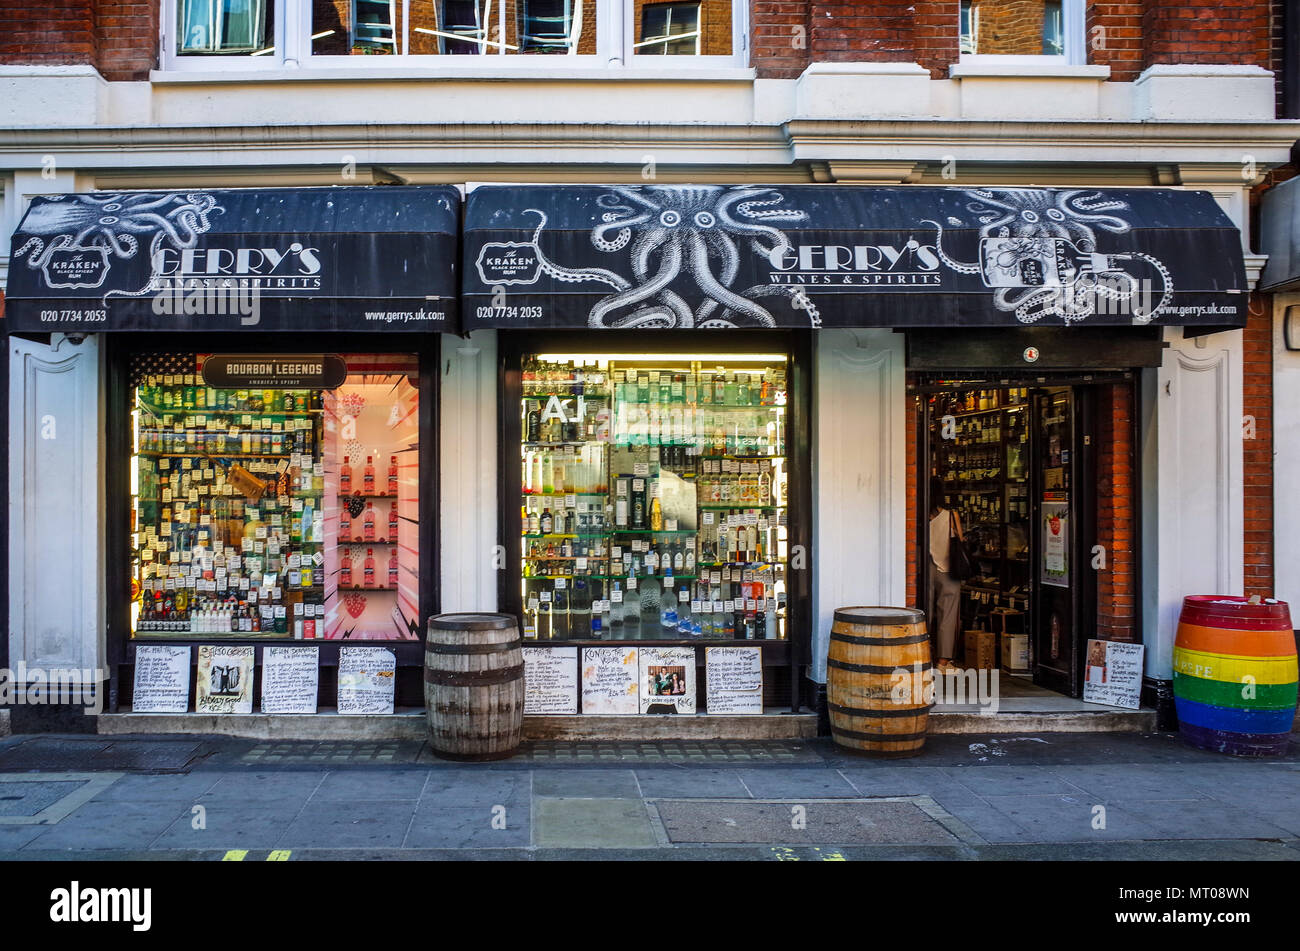 Soho Old Compton Street - Gerry's Wines and Spirits Old Compton St in London's Soho entertainment district is known for selling rare and exotic drinks Stock Photo